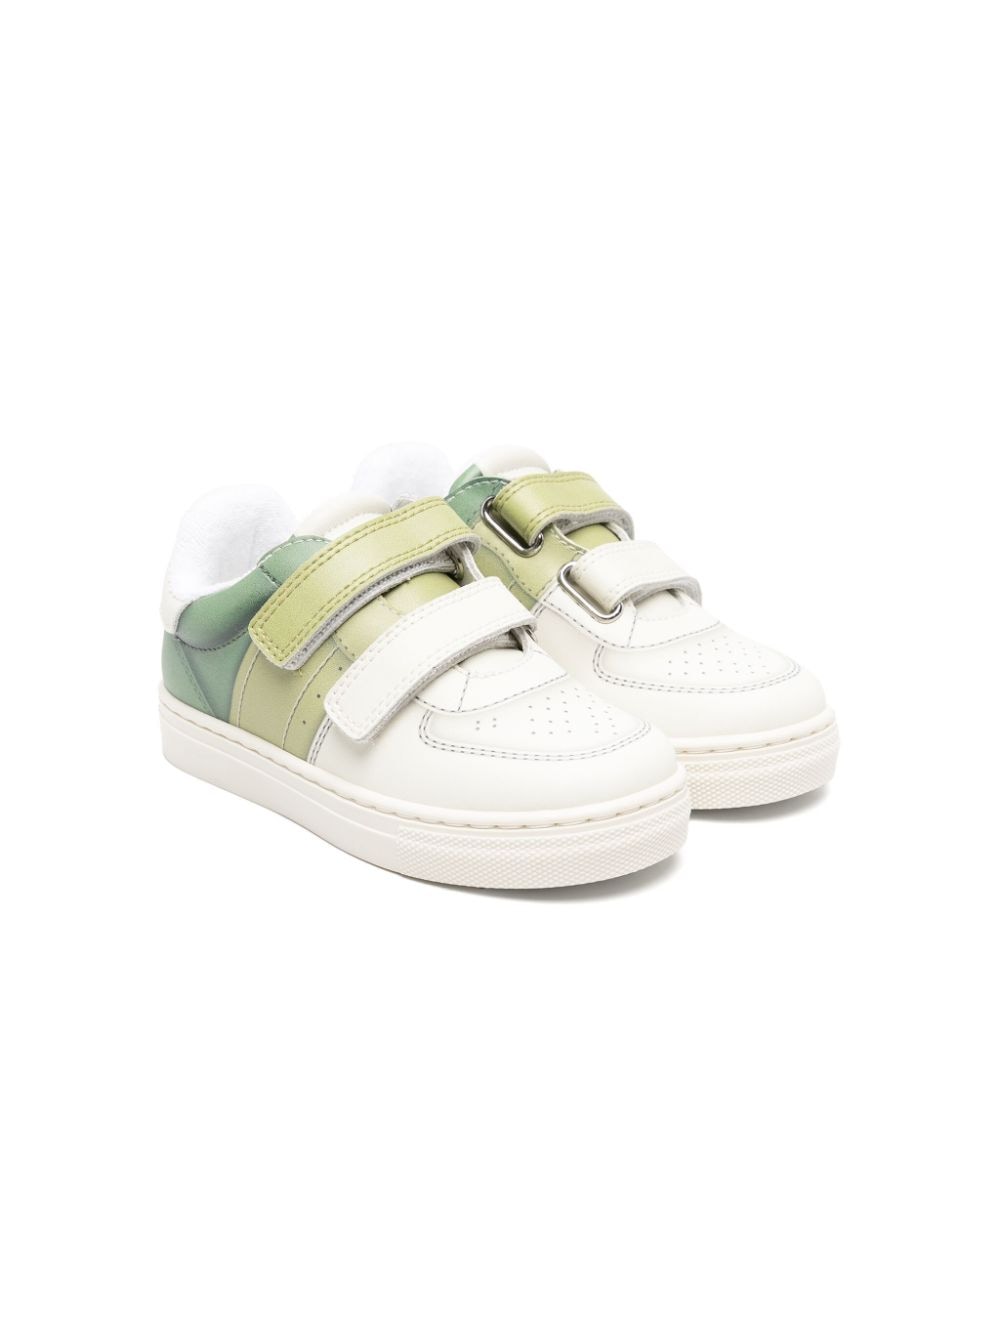 Image 1 of Emporio Armani Kids gradient touch-strap sneakers